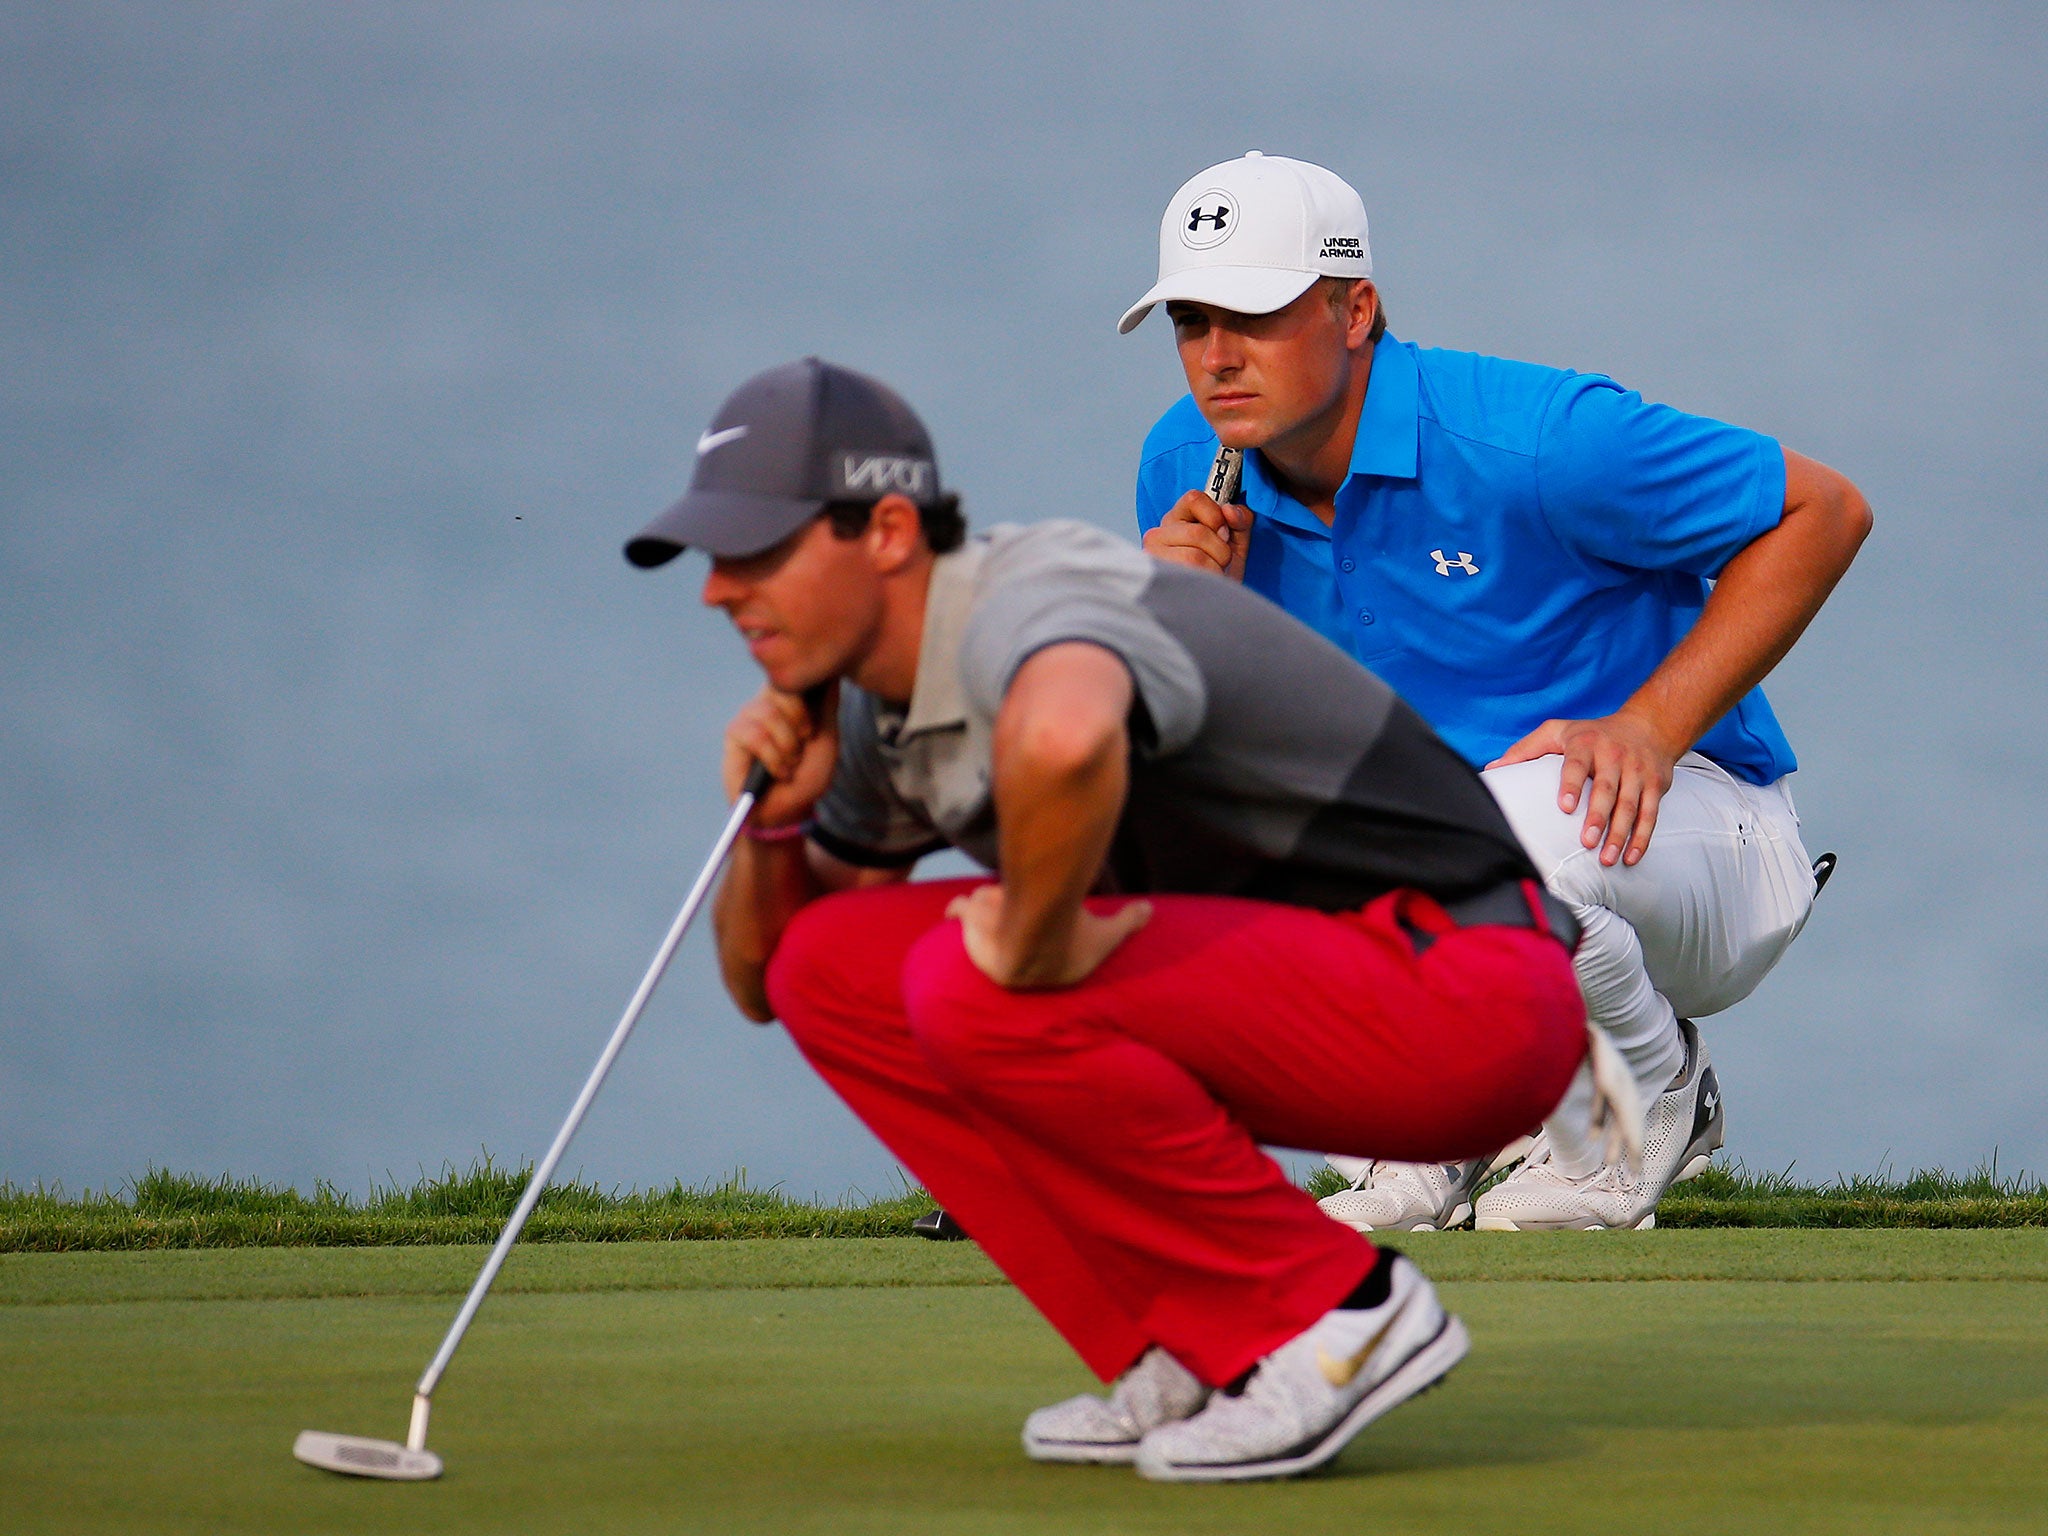 Rory McIlroy and Jordan Spieth during their first round at Whistling Straits